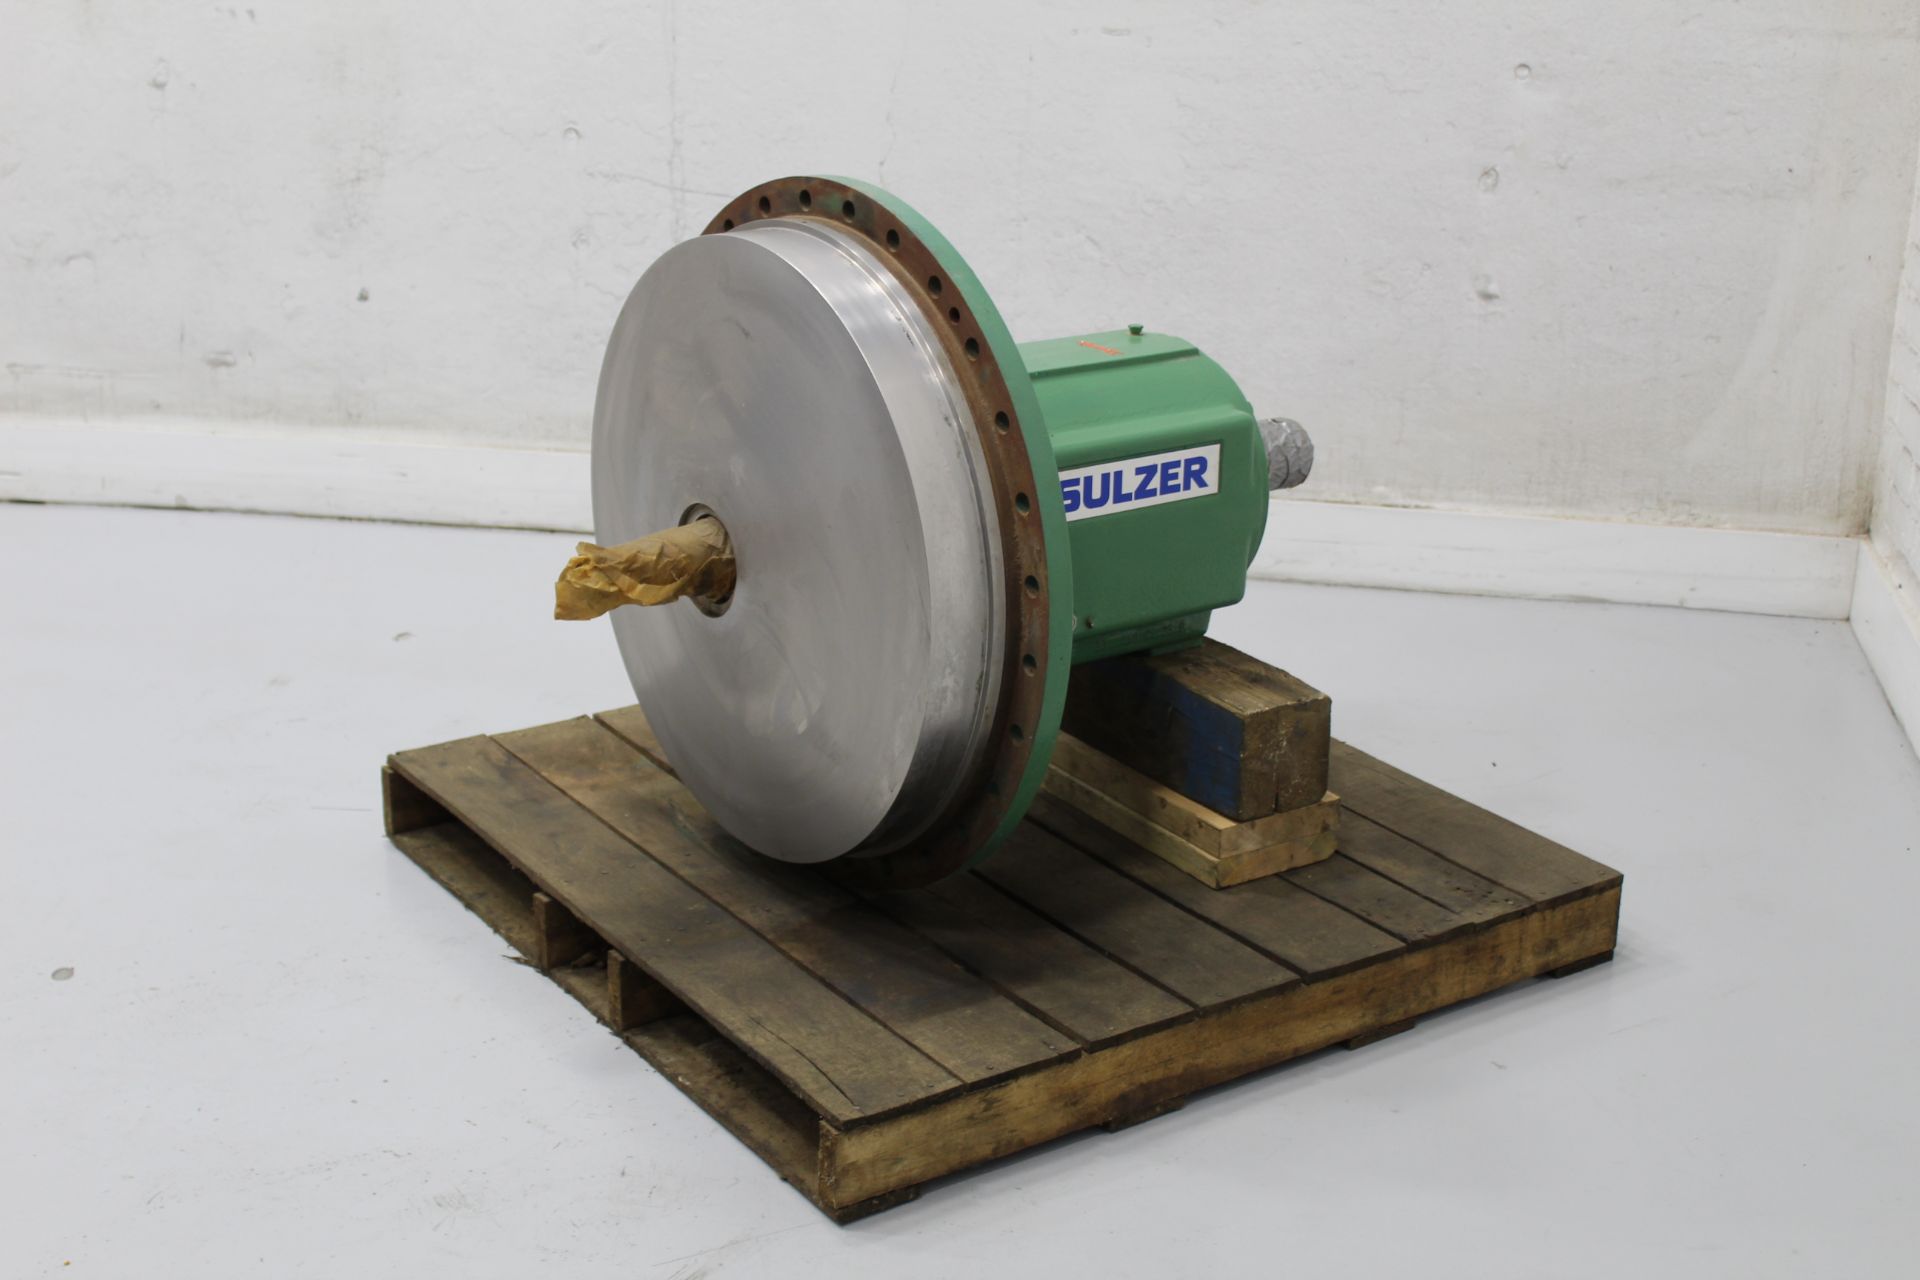 SULZER APT61-24 PUMP POWER END, WITH 28" DIAMETER STUFFING BOX COVER, PACKING (42968, LOCATED IN - Image 2 of 3